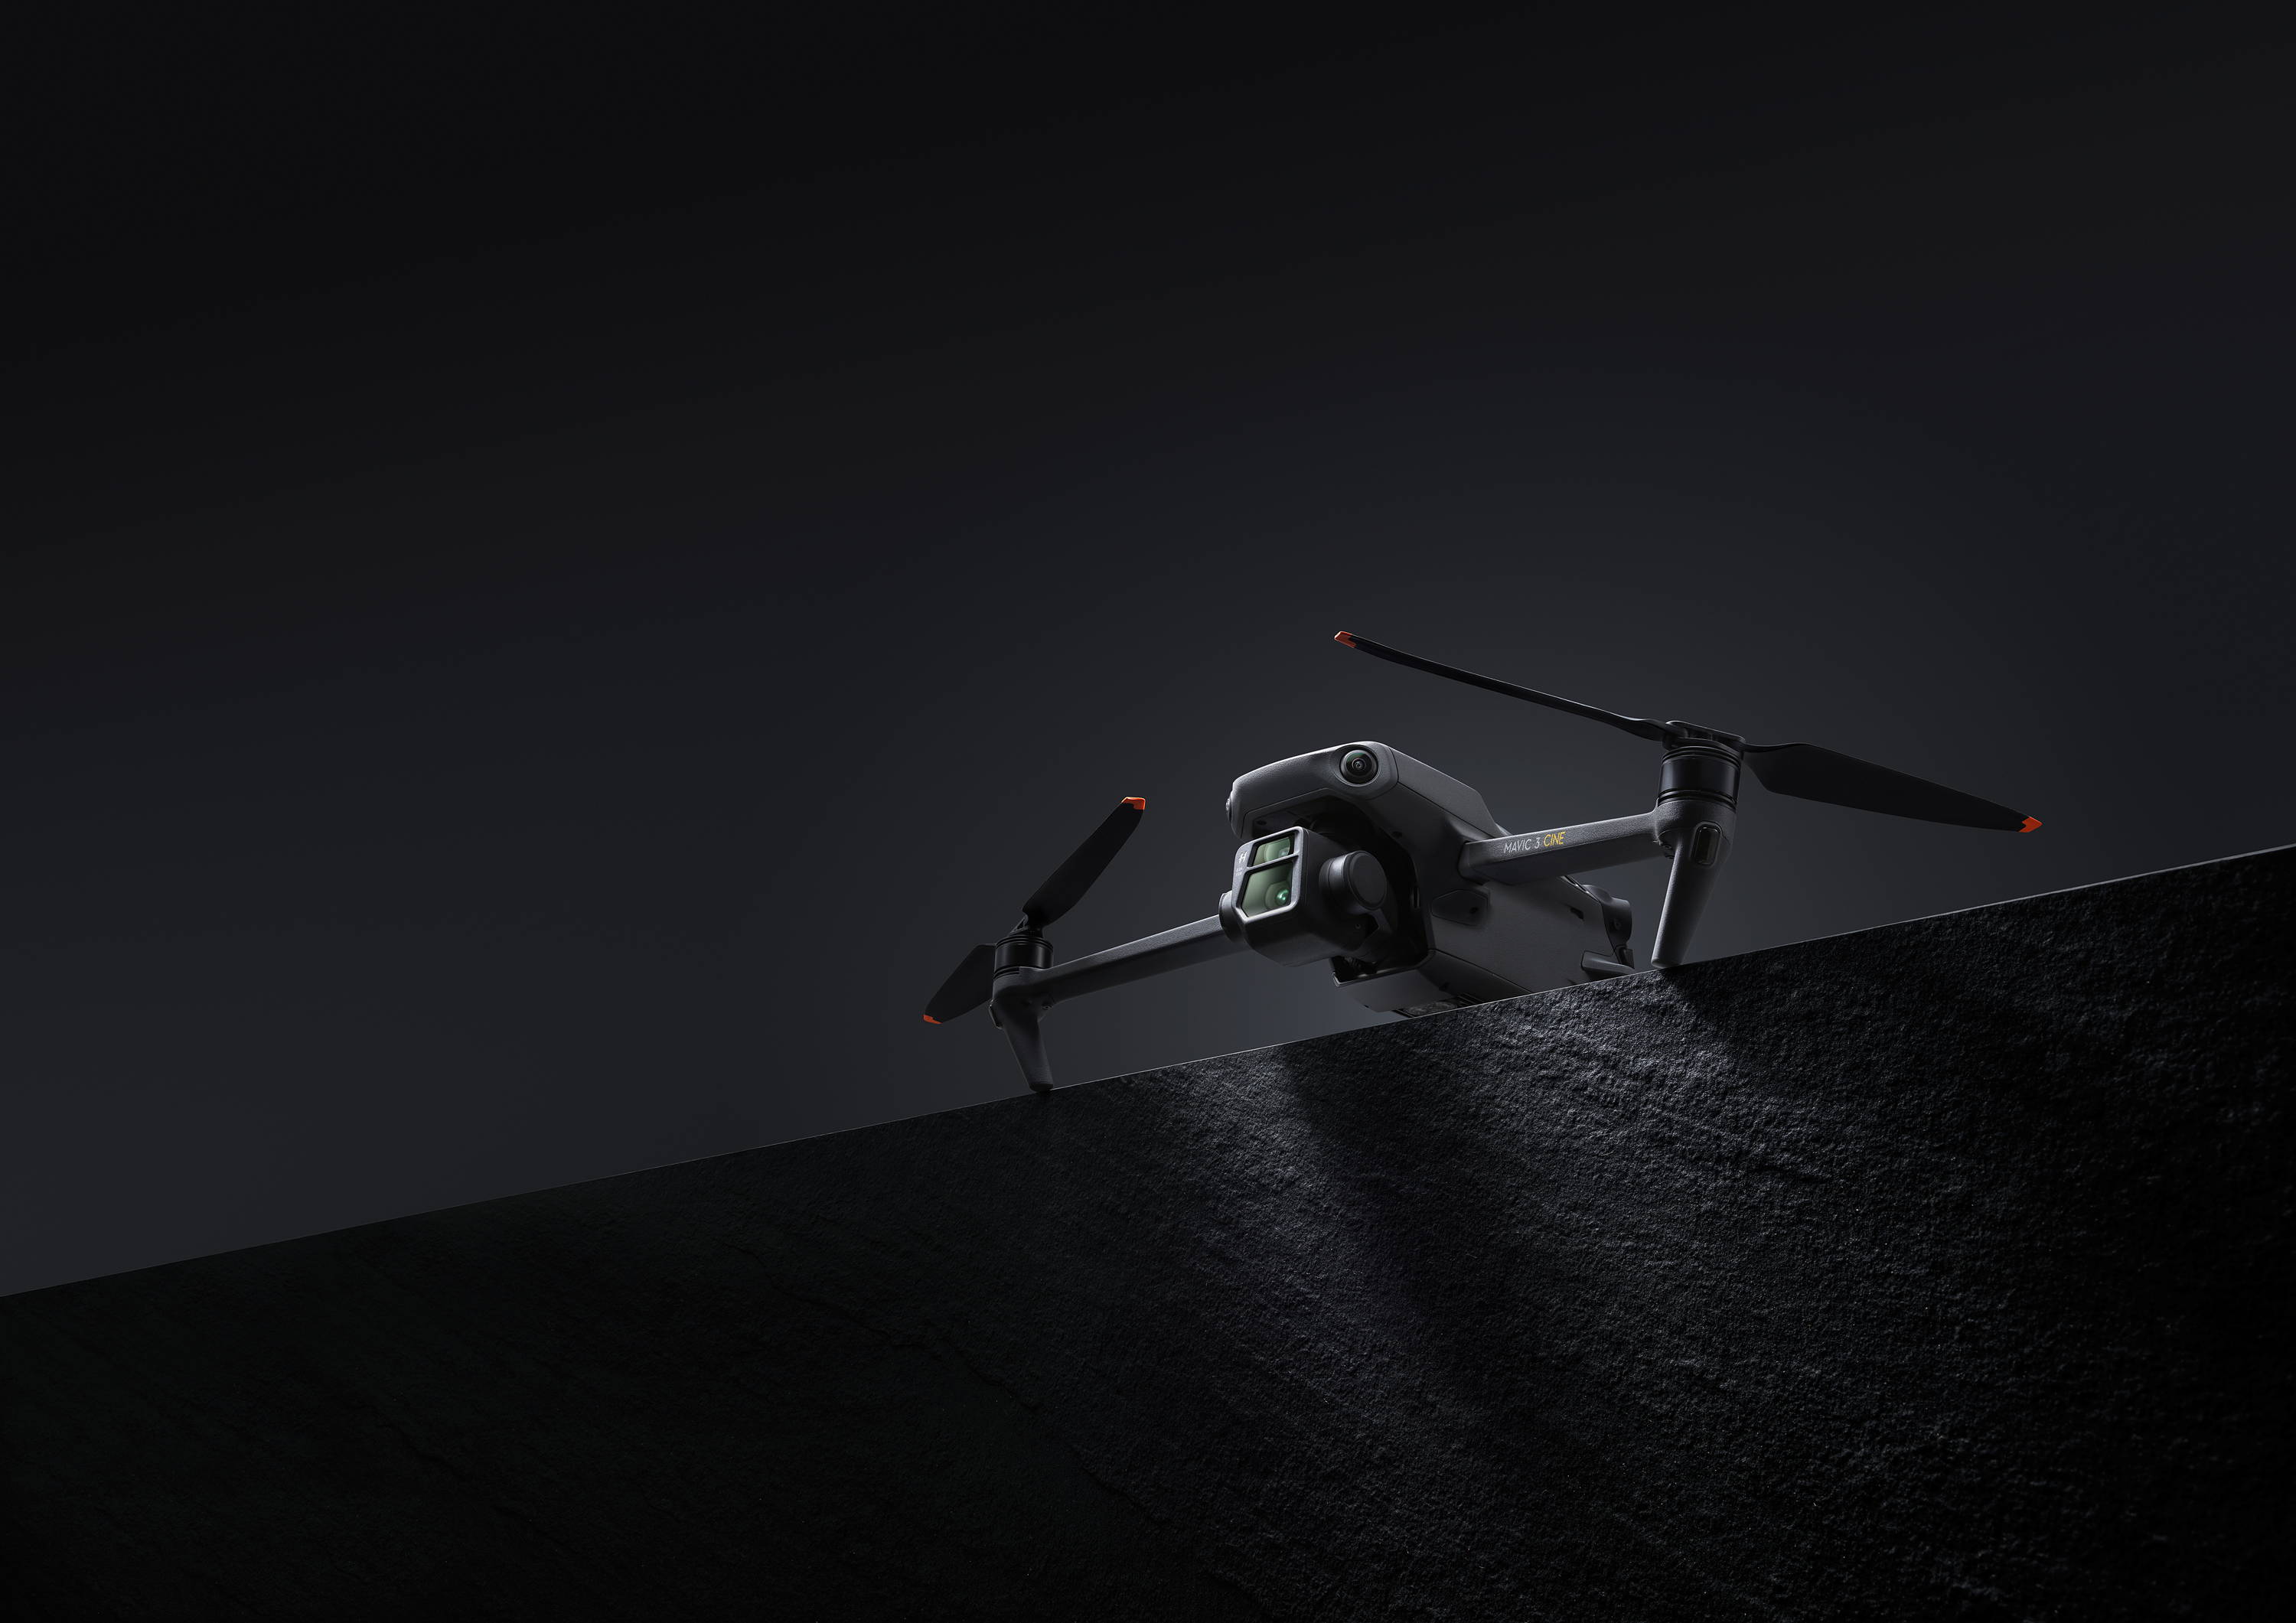 The All-New DJI Mavic 3: Imaging Above Everything